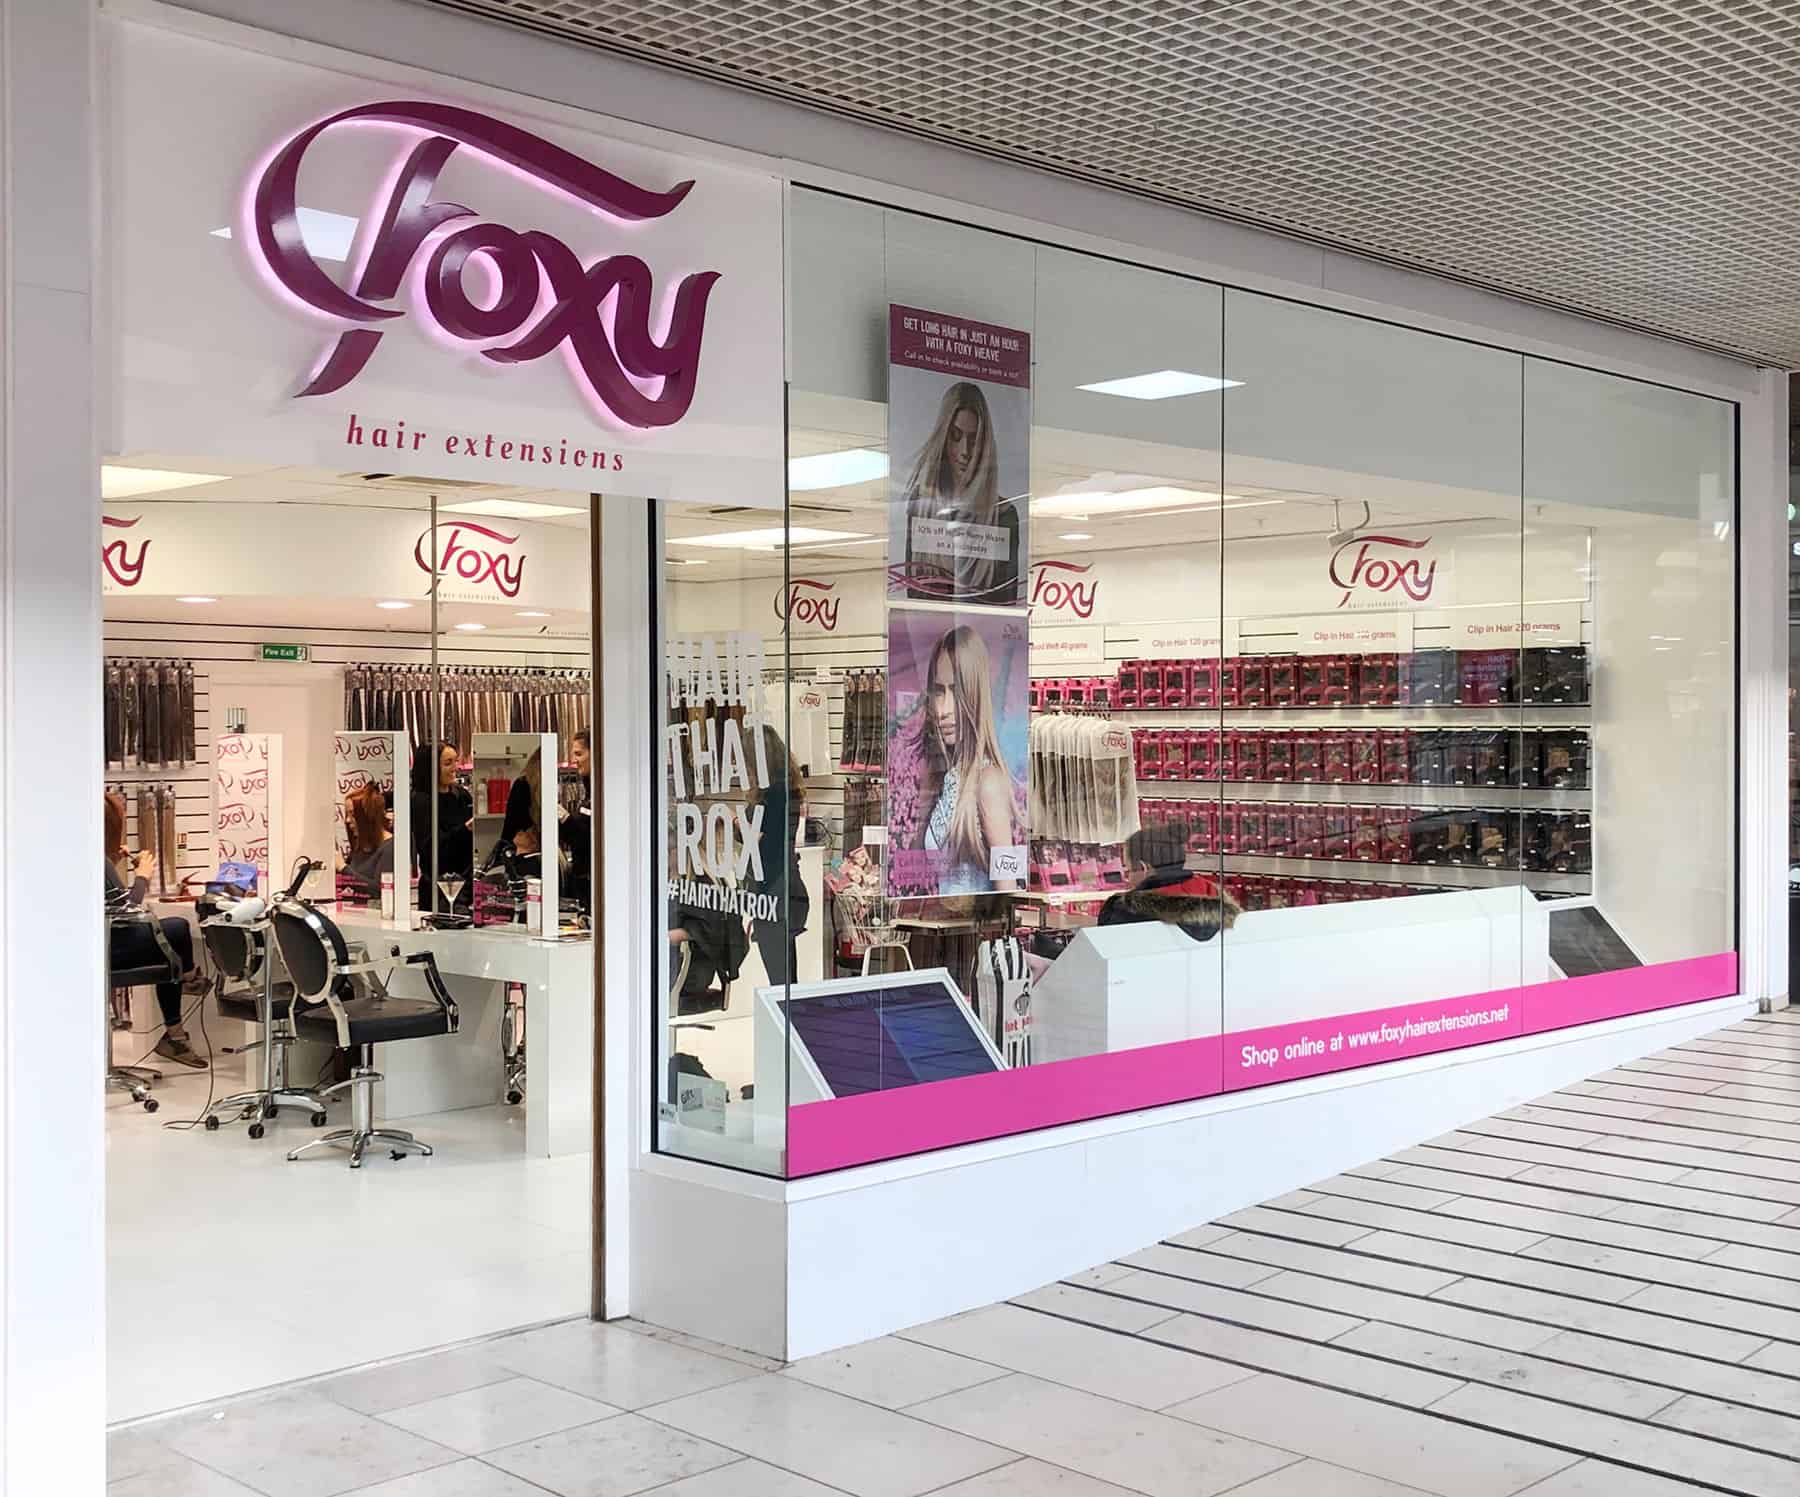 Foxy Hair Extensions store front at Metrocentre in Gateshead